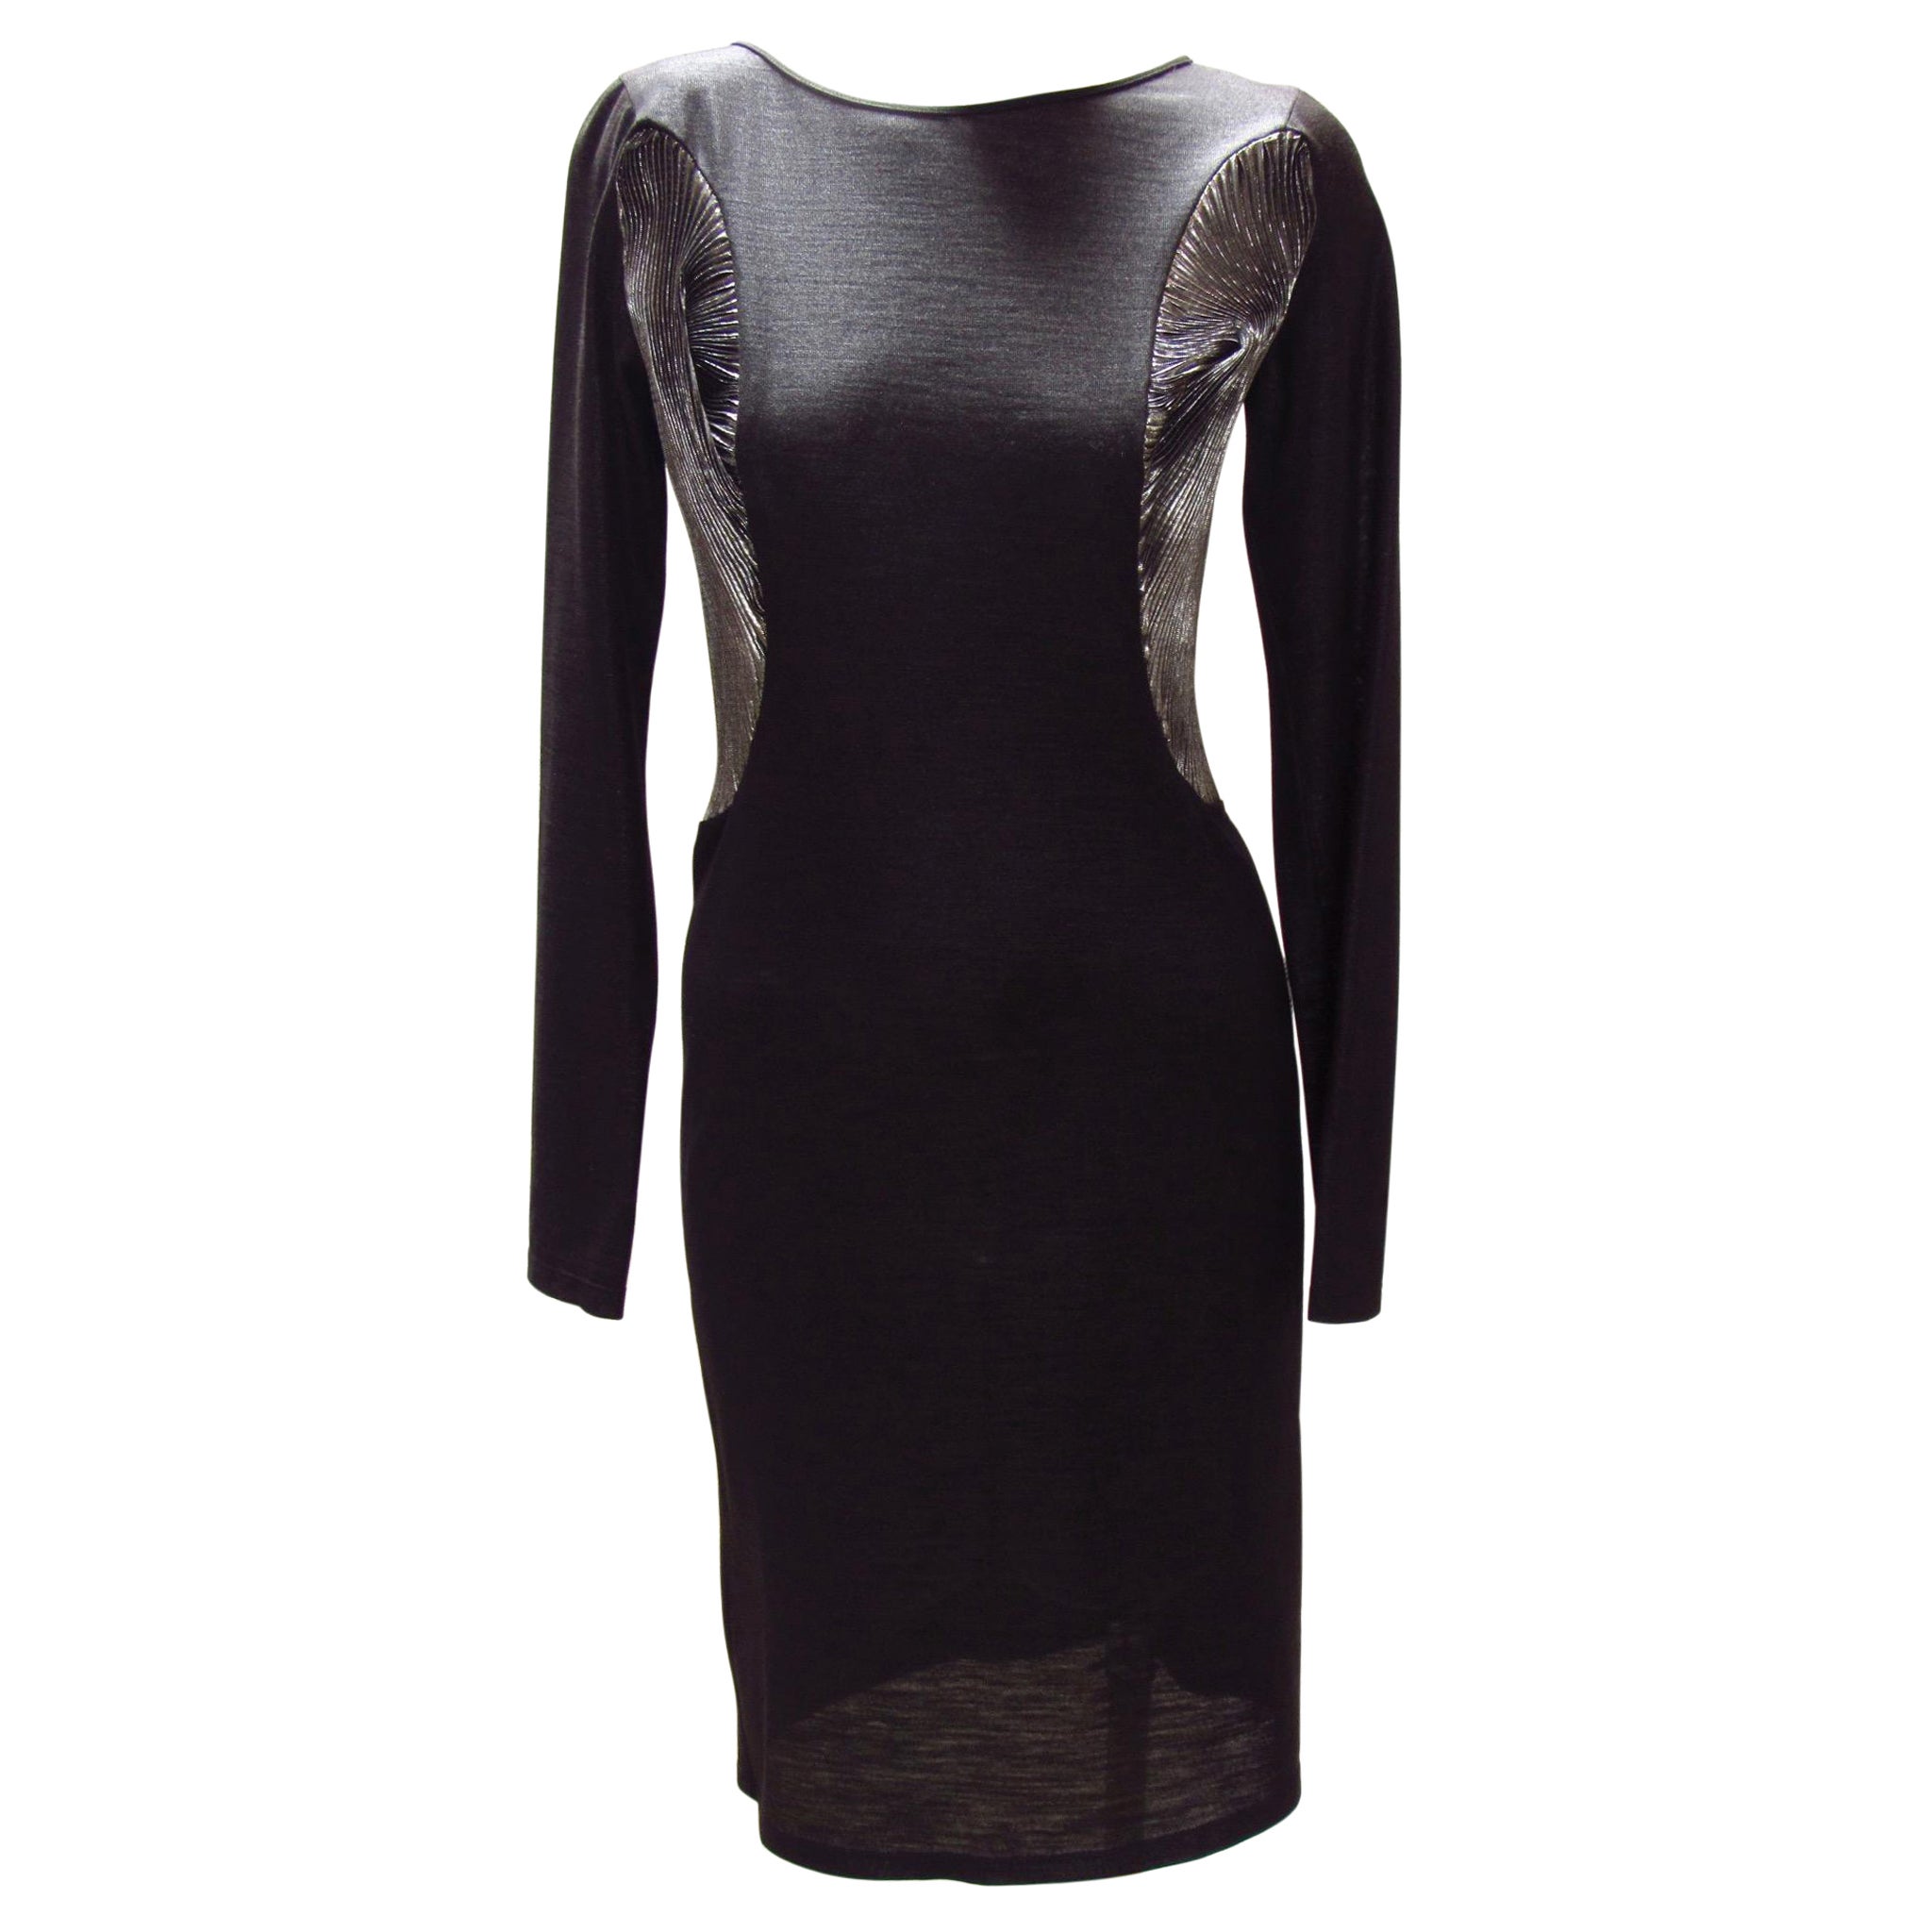 Hussein Chalayan Black and Silver Dress